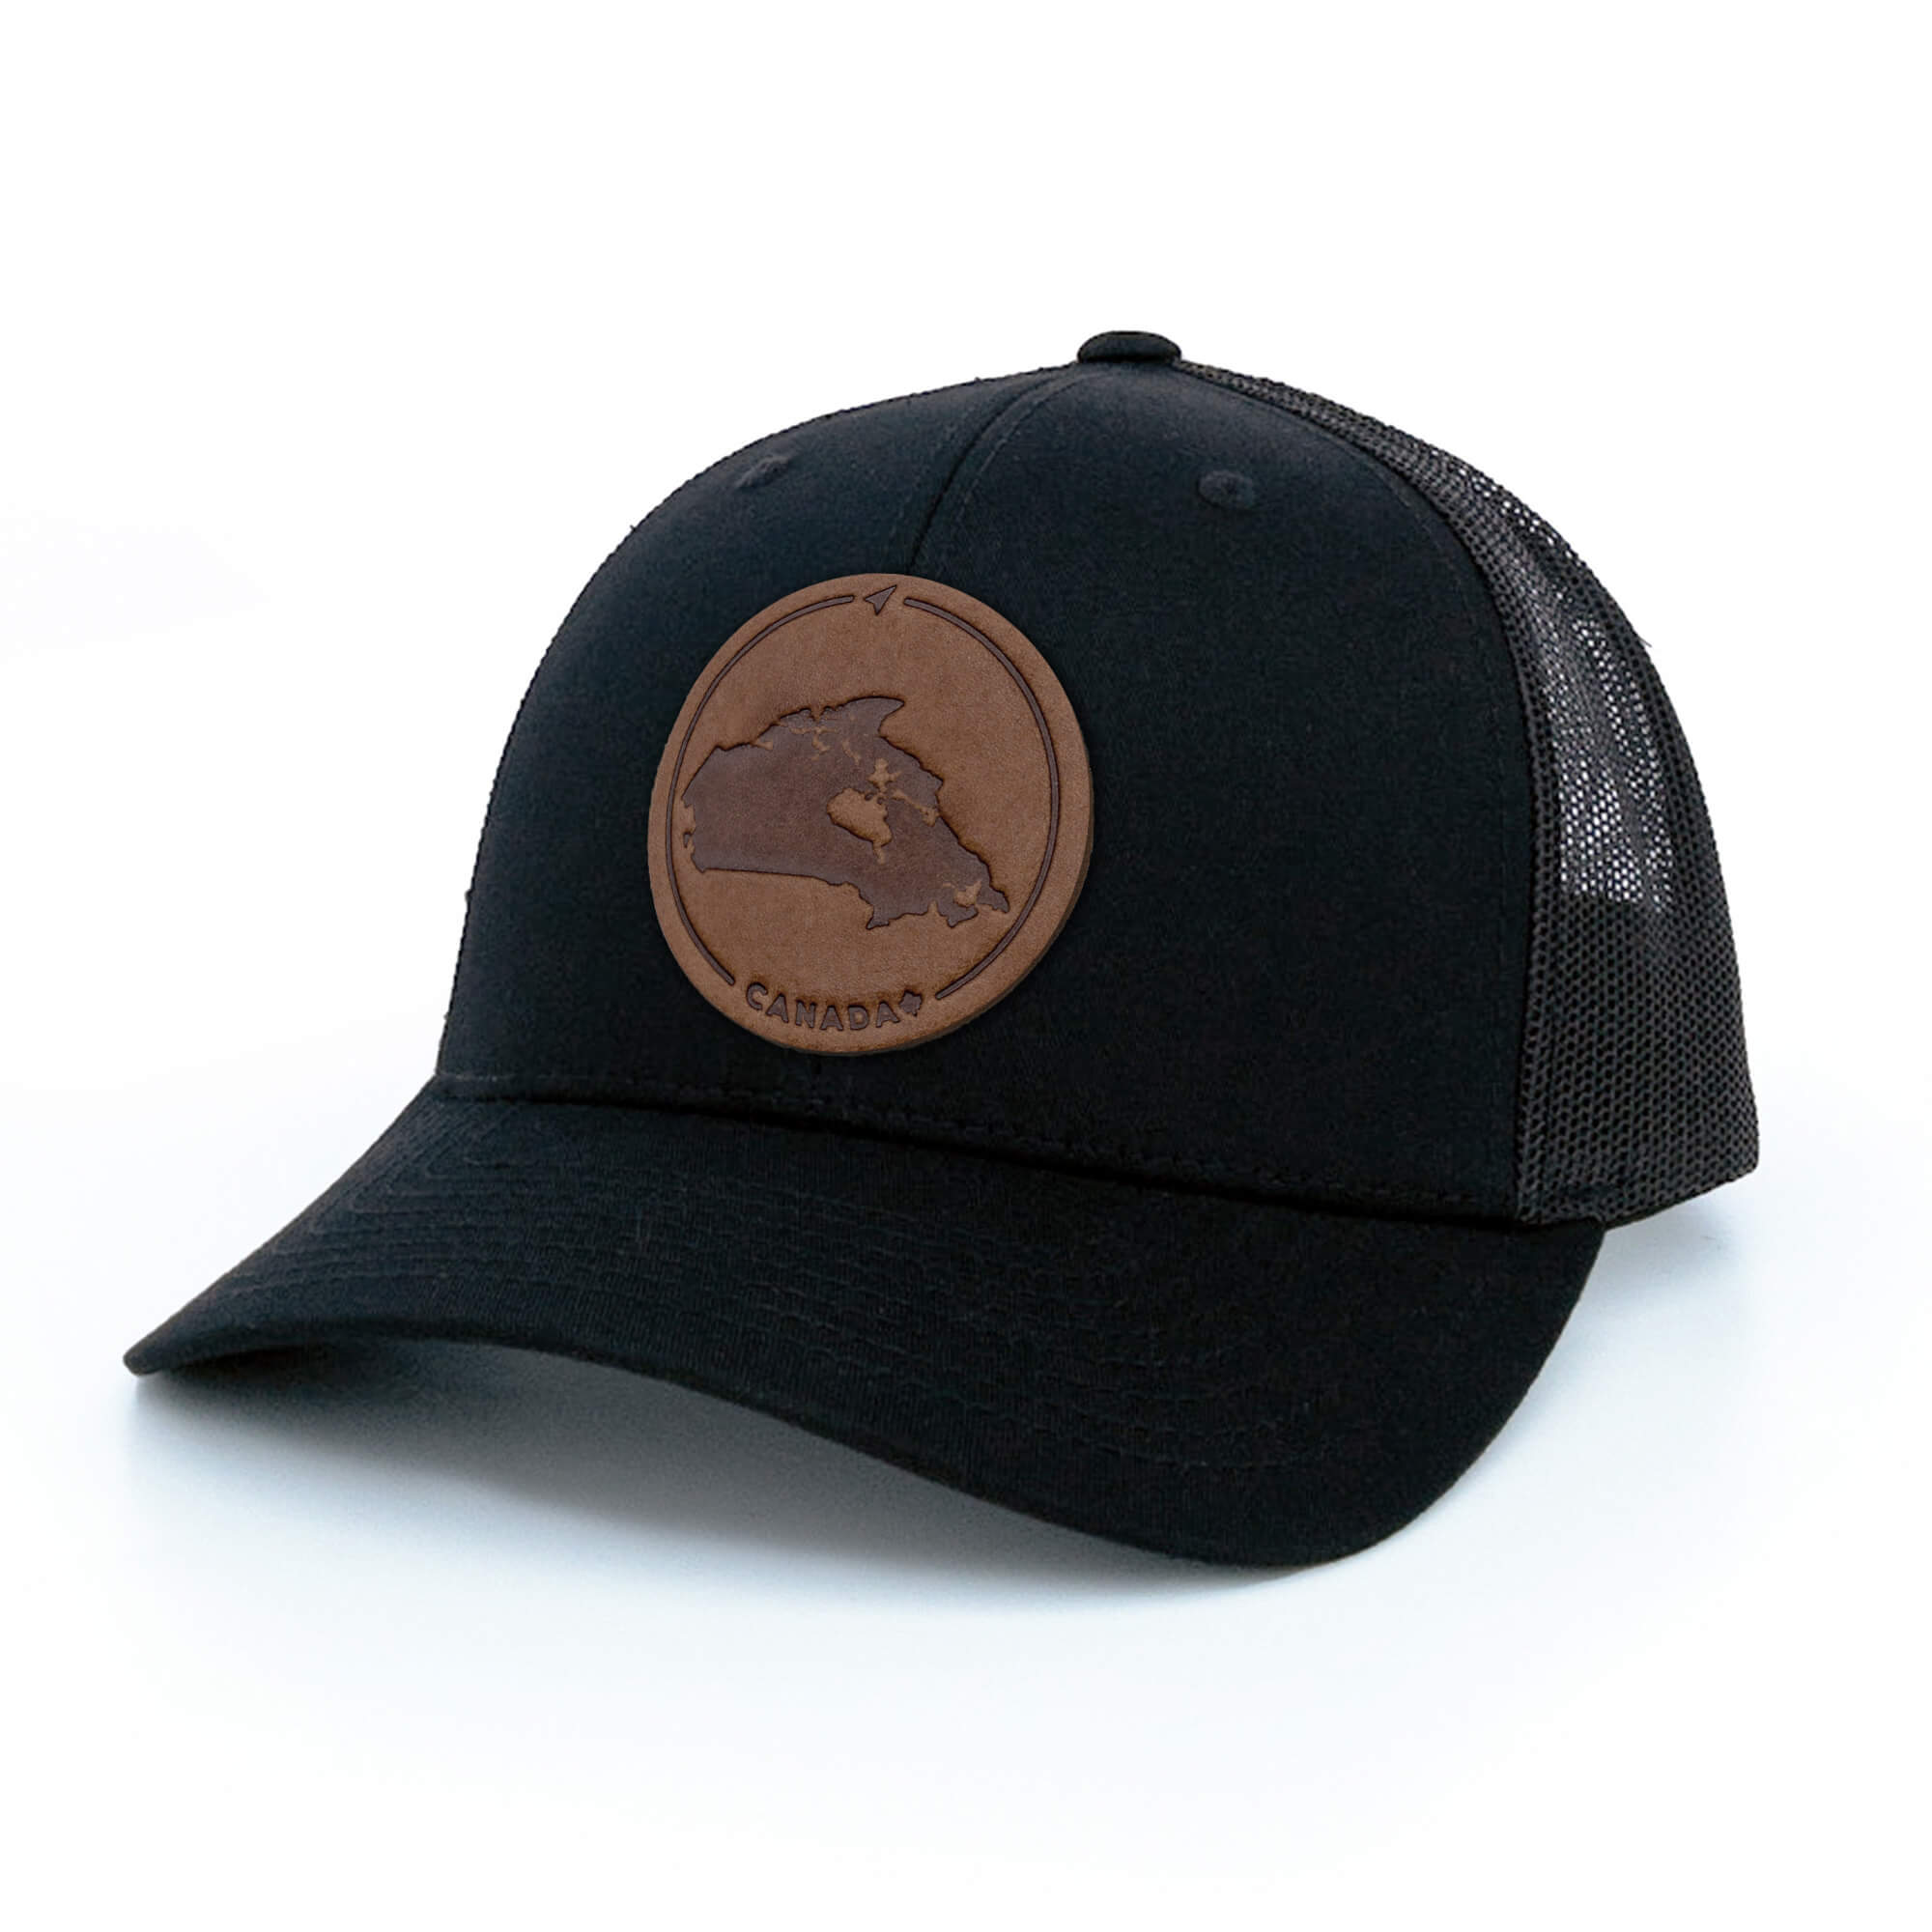 Black trucker hat with full-grain leather patch of Canada | BLACK-002-002, CHARC-002-002, NAVY-002-002, HGREY-002-002, MOSS-002-002, BROWN-002-002, RED-002-002